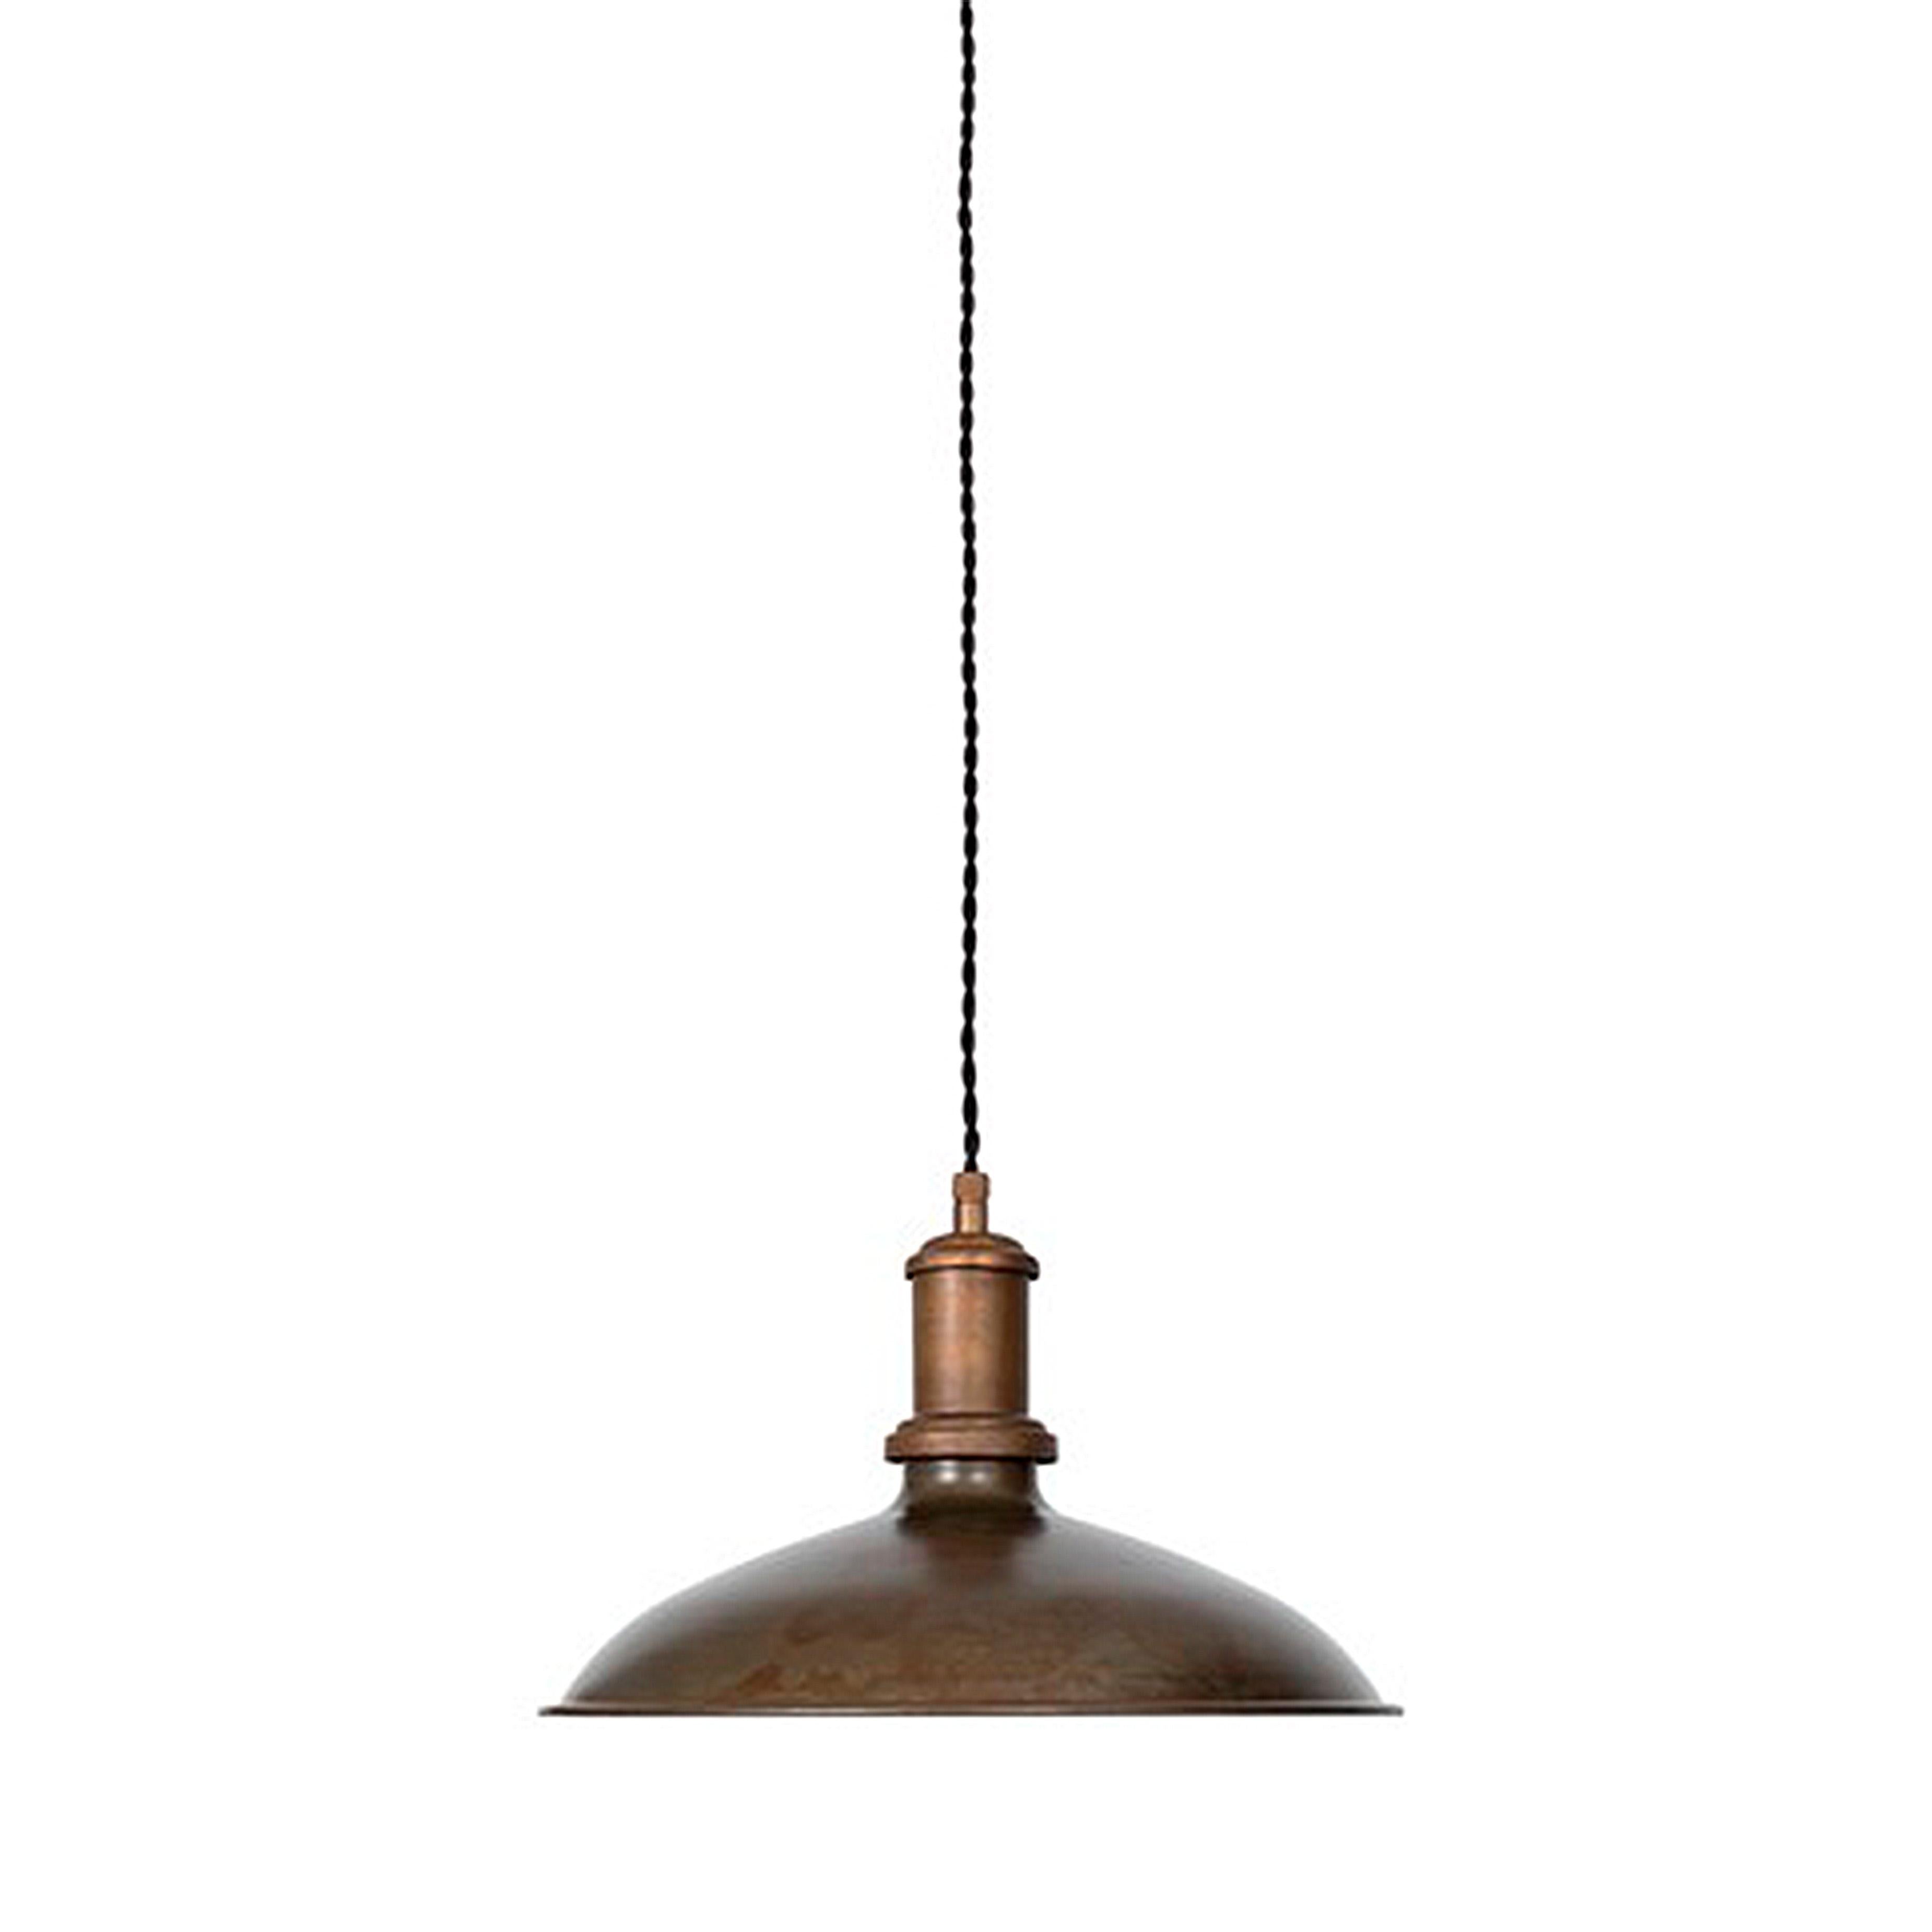 Contemporary Sabina Grubbeson Small Kavaljer Black Ceiling Lamp by Konsthantverk For Sale